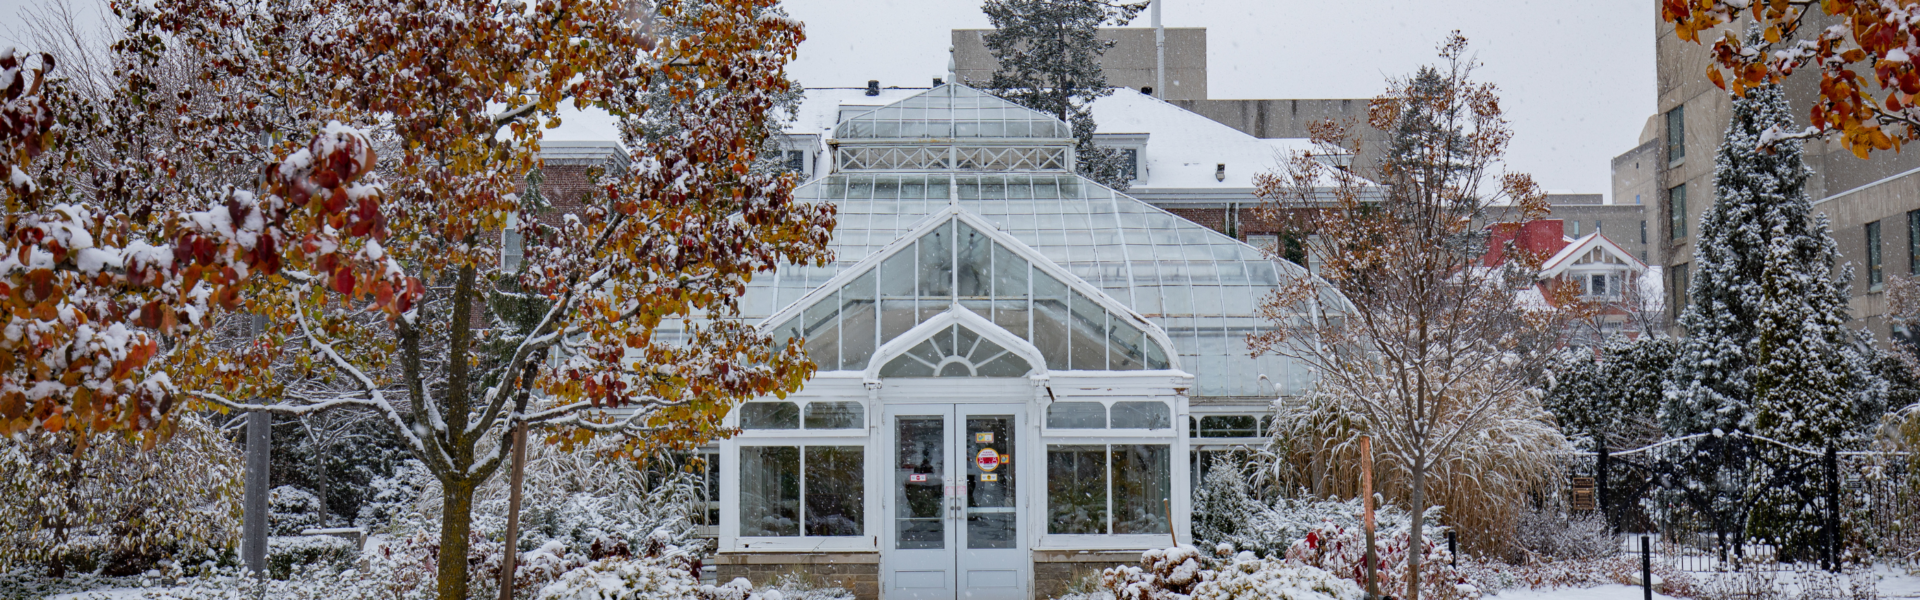 The conservatory on a snowy winter day.